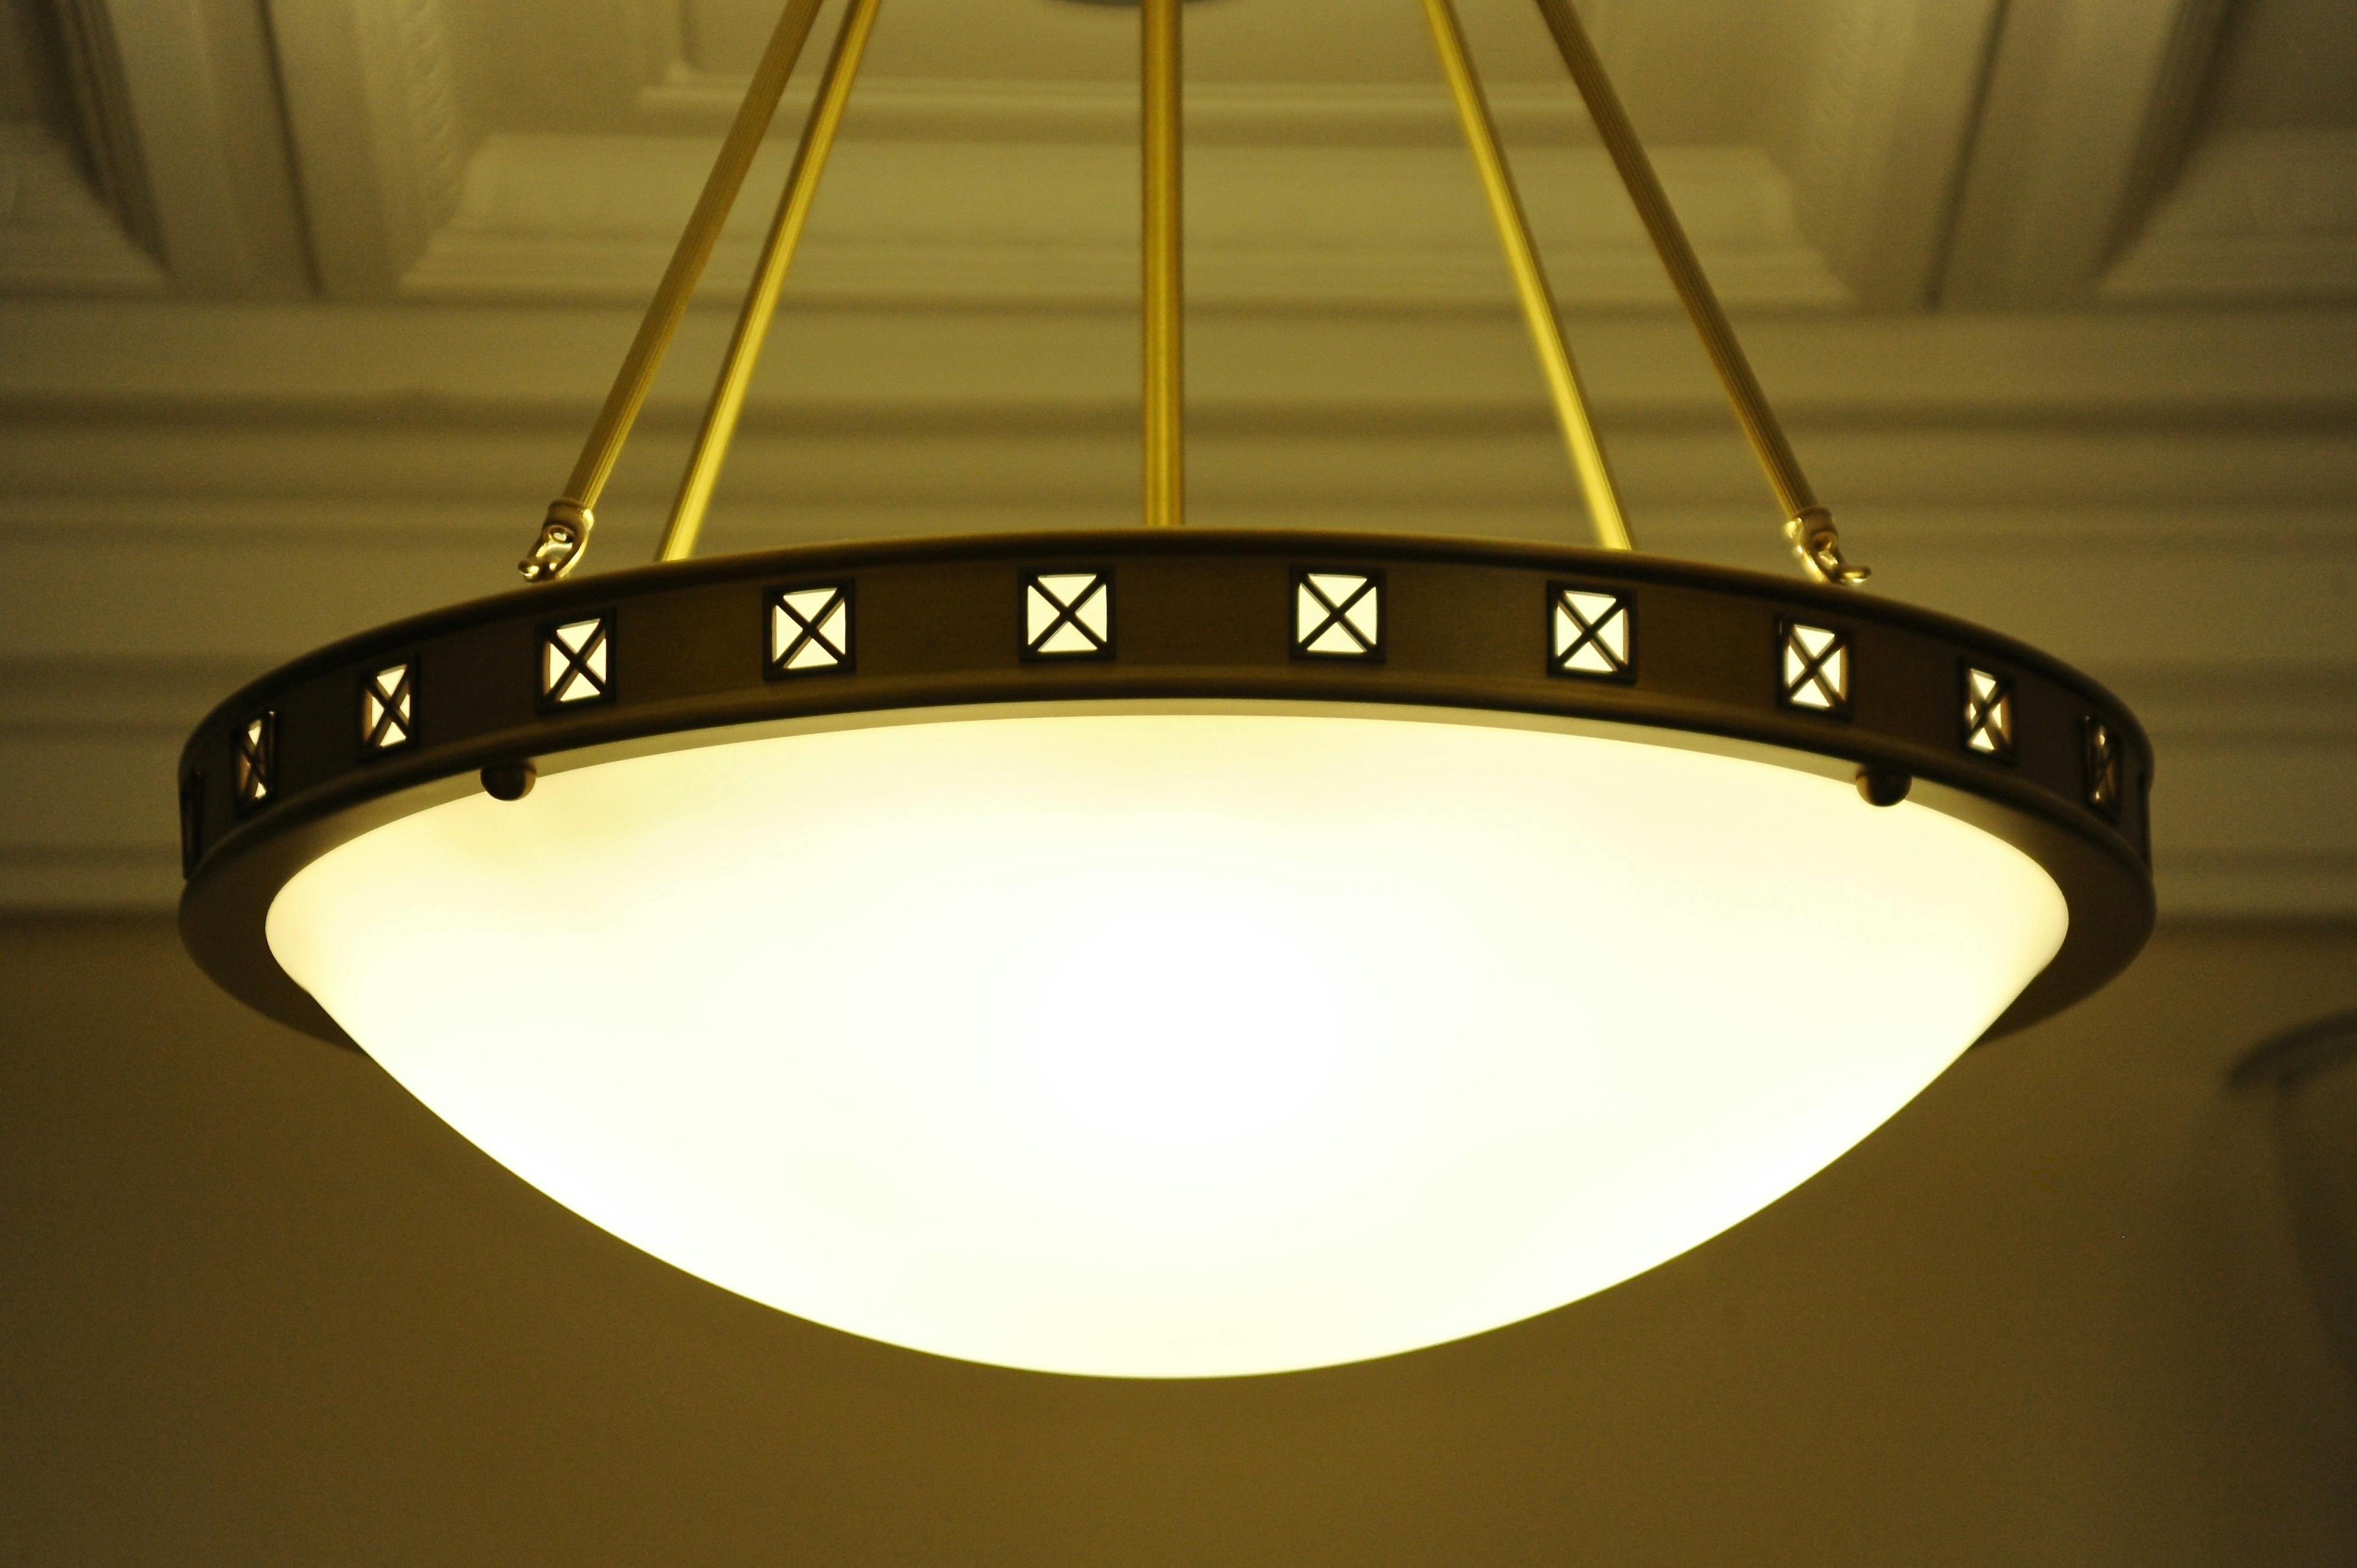 Free stock photo of ceiling lights